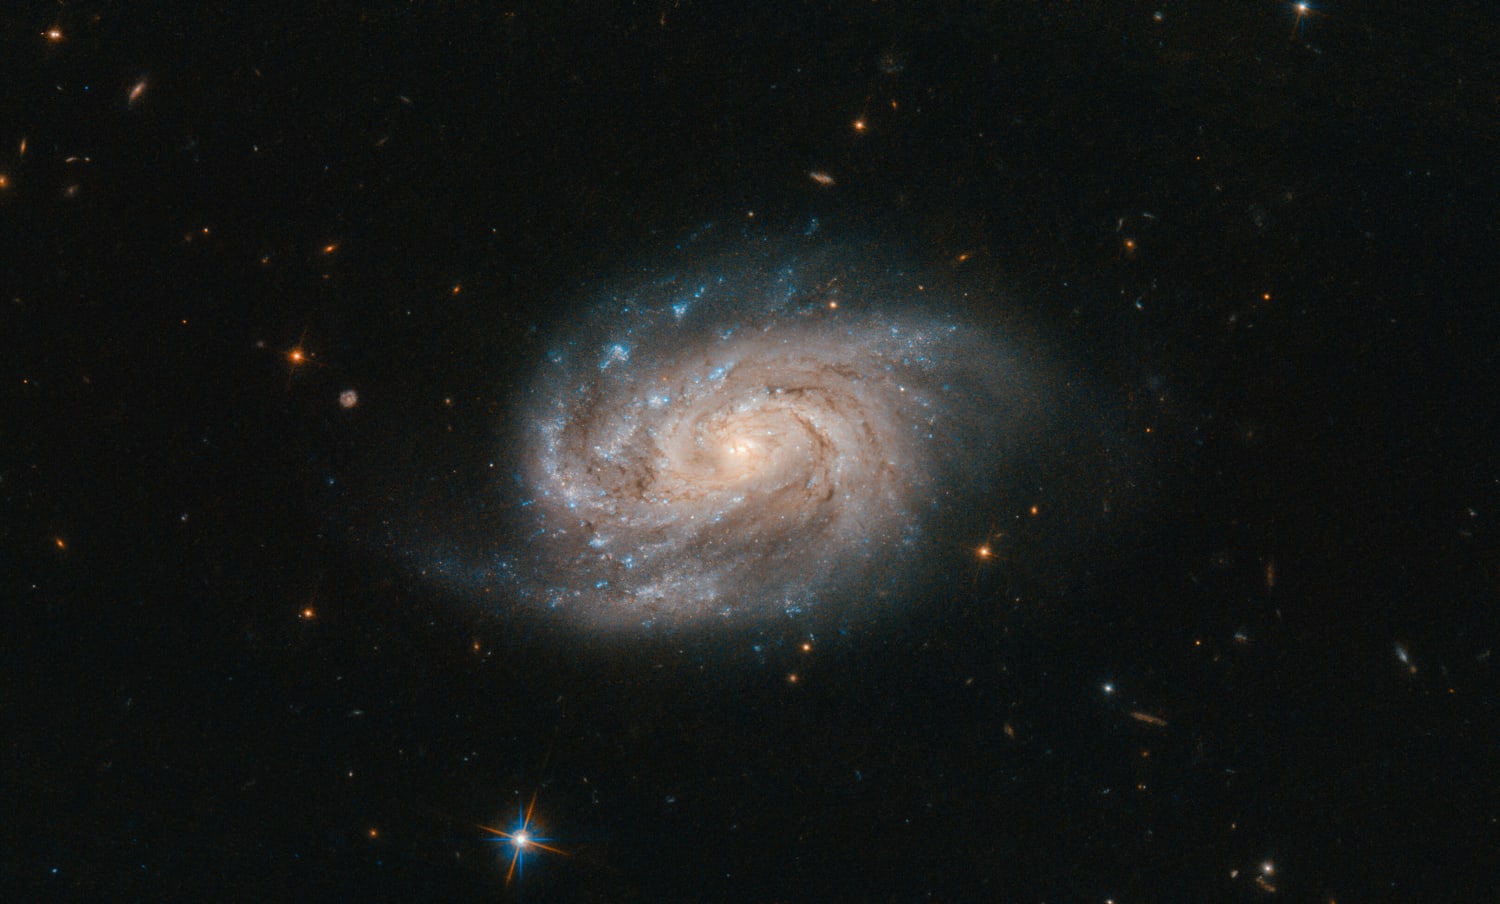 Hubble Views Galaxy From Famous Catalog